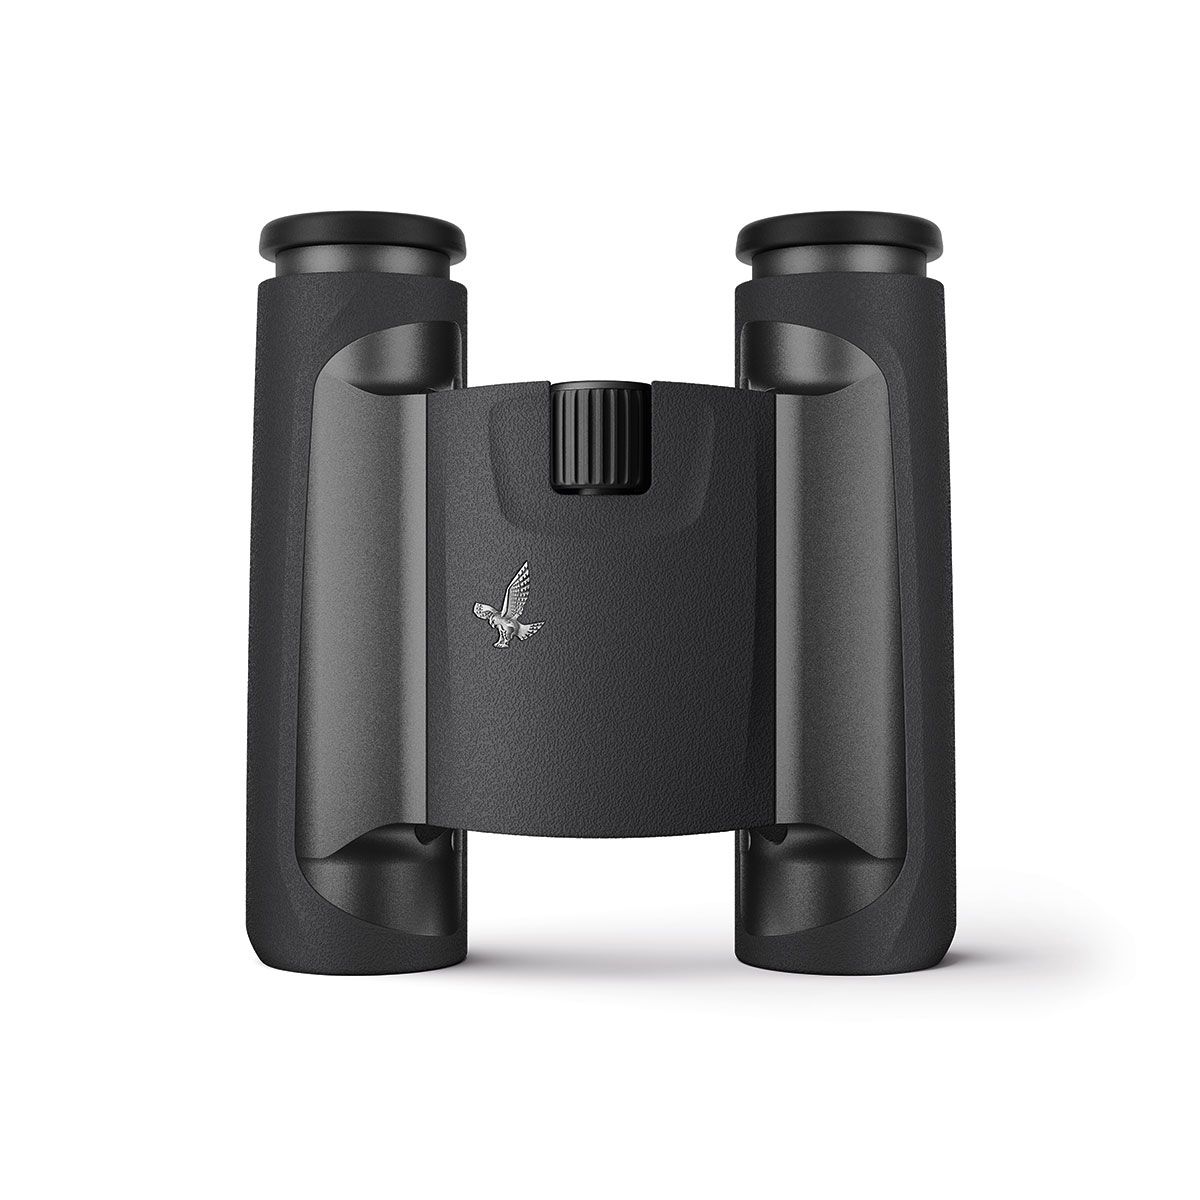 Swarovski CL 10x25 Pocket Binoculars Anthracite with Wild Nature Accessory Pack - Product Photo 6 - High resolution photo of the binoculars from a top down perspective